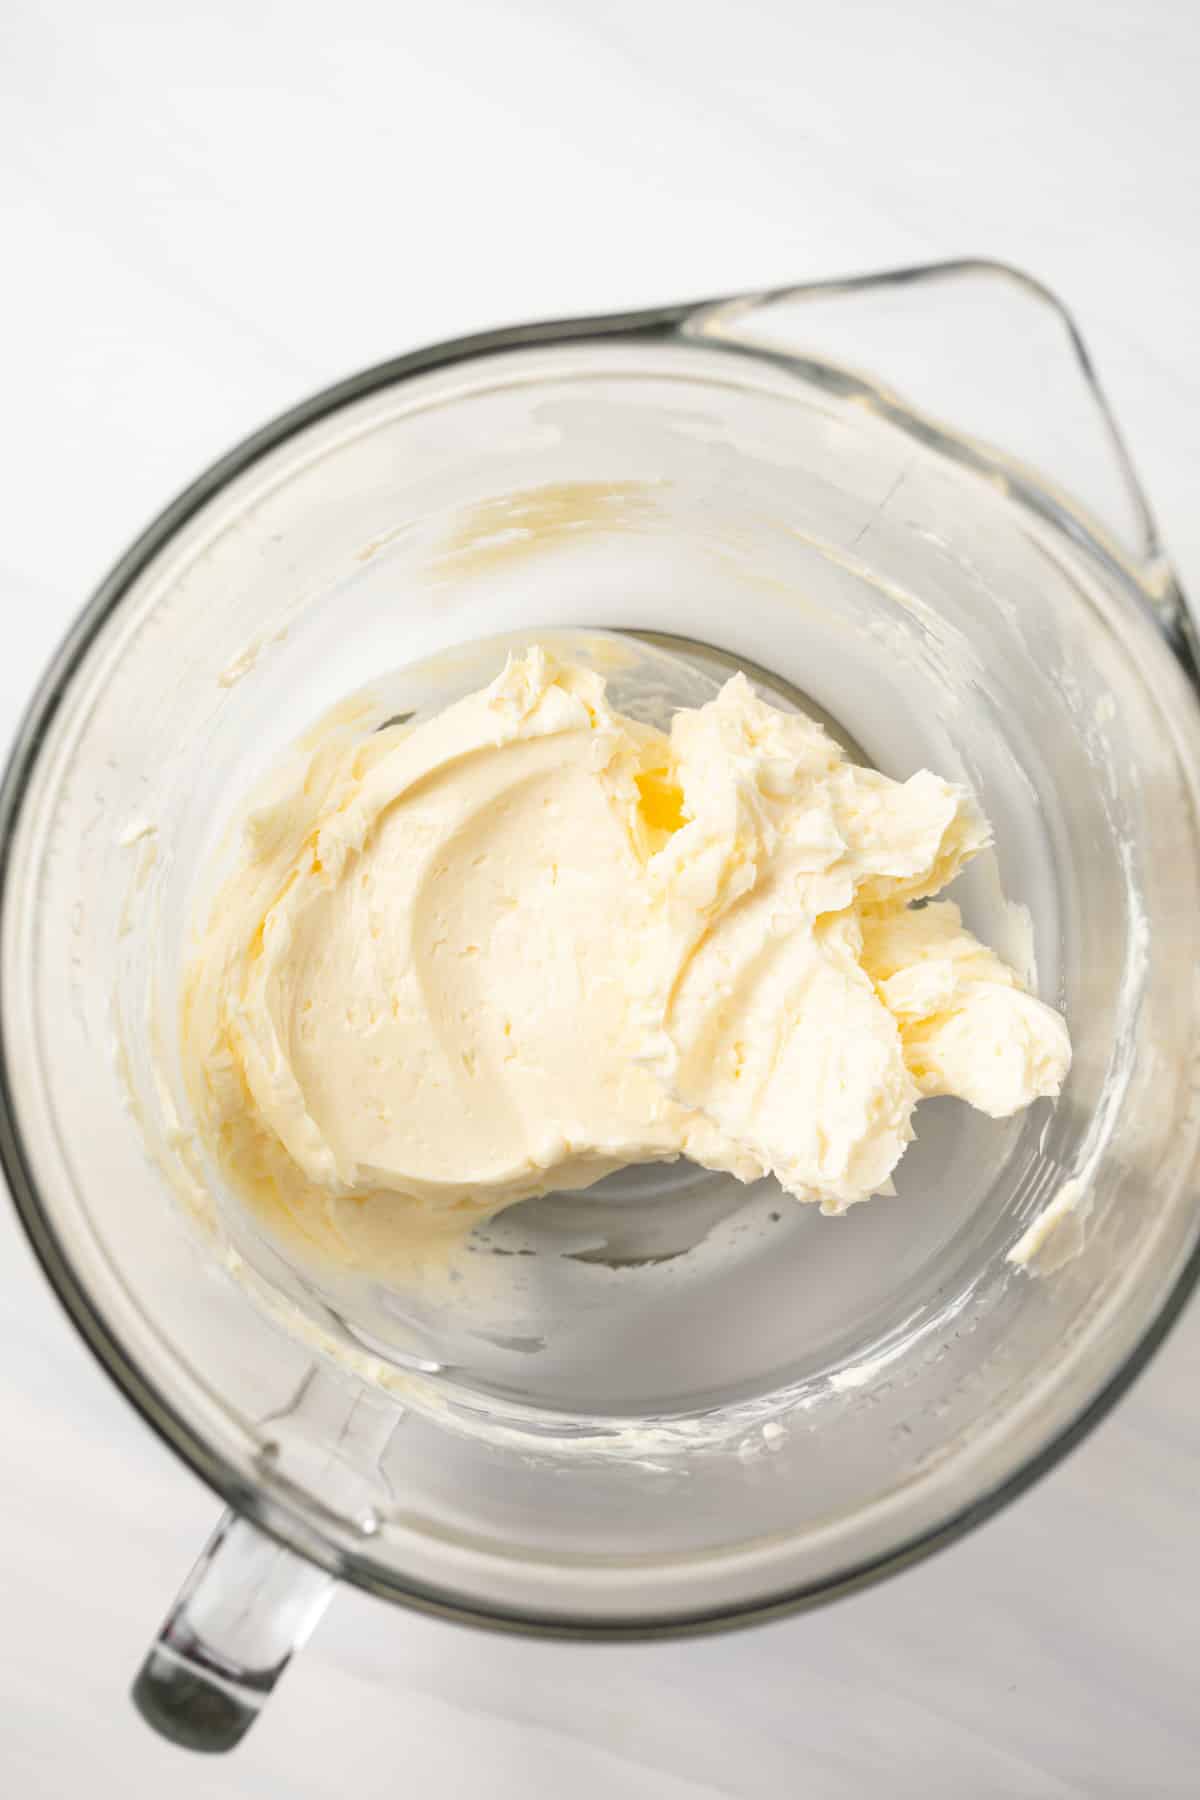 Creamed butter in a glass mixing bowl.